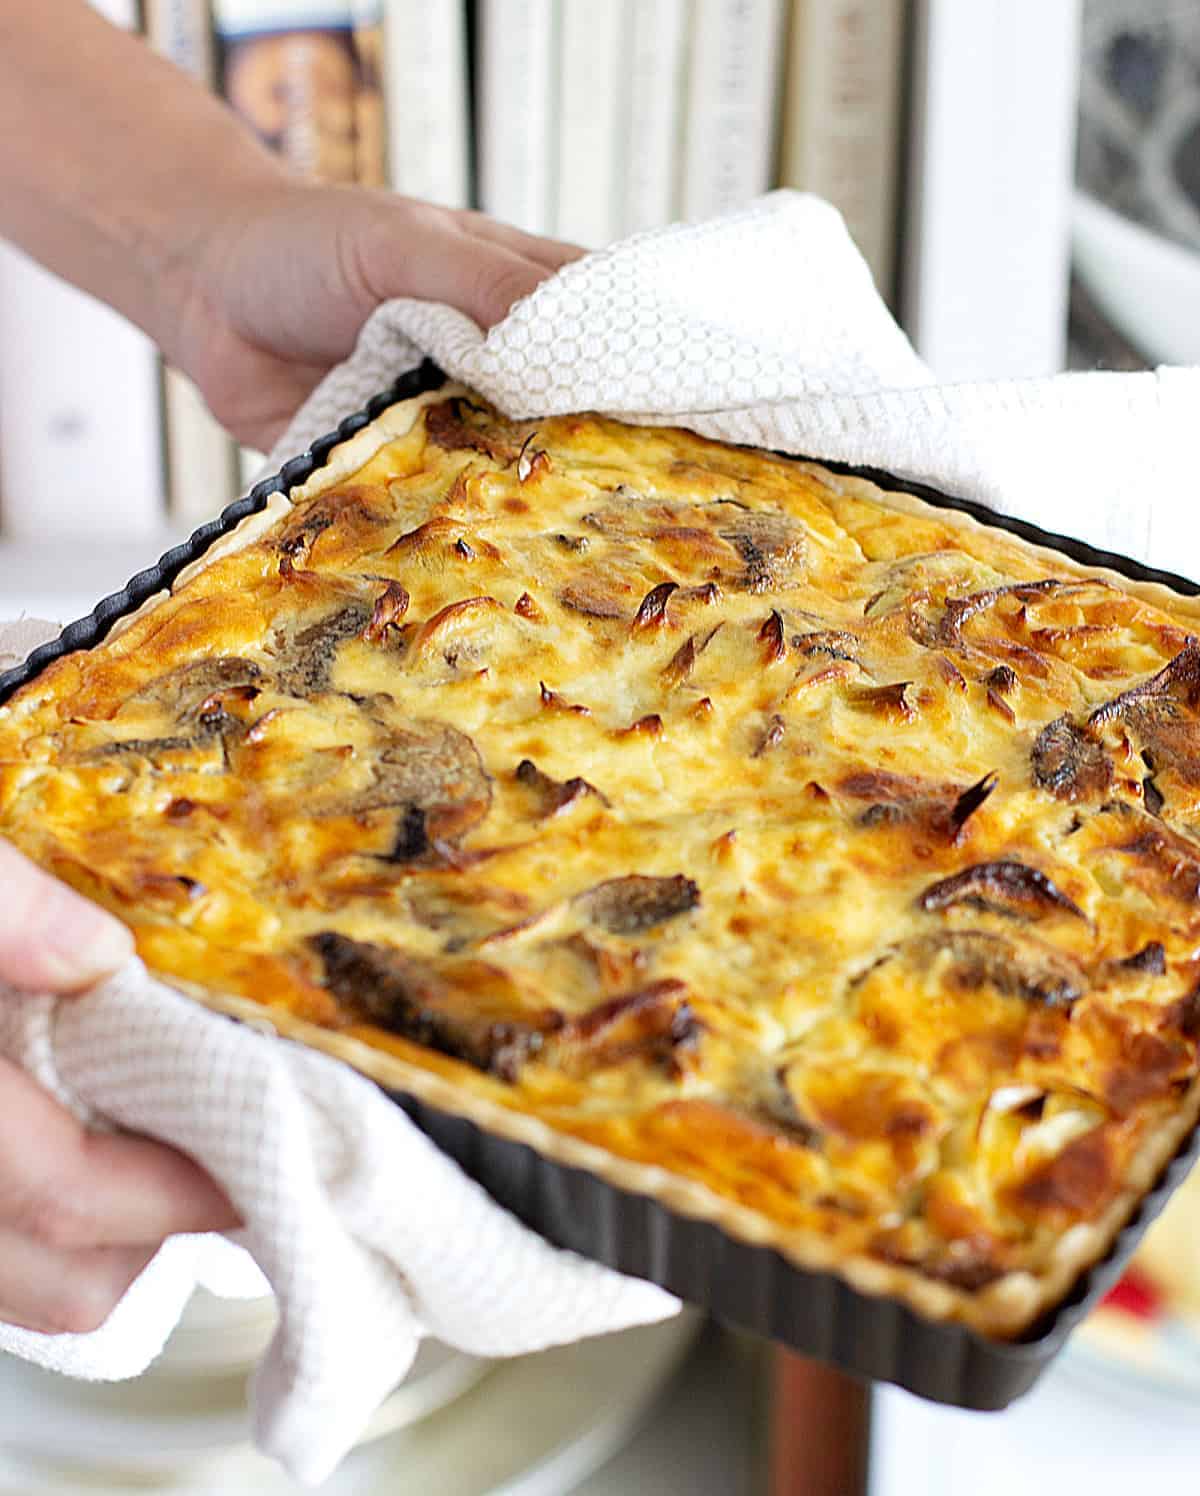 Hands holding square mushroom quiche still in metal pan.